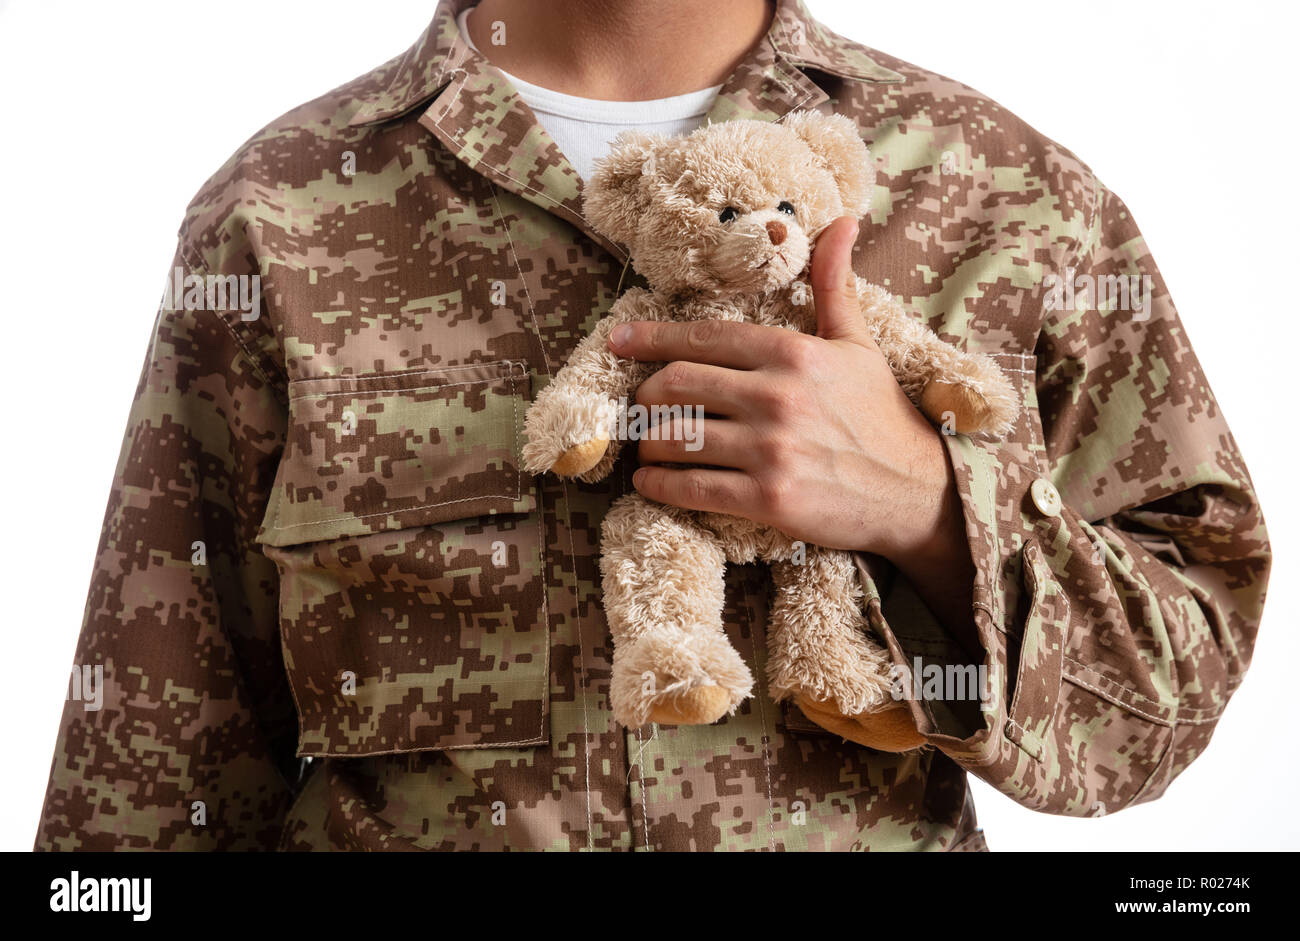 Father in the Army. Young soldier holding a teddy bear standing on white background Stock Photo